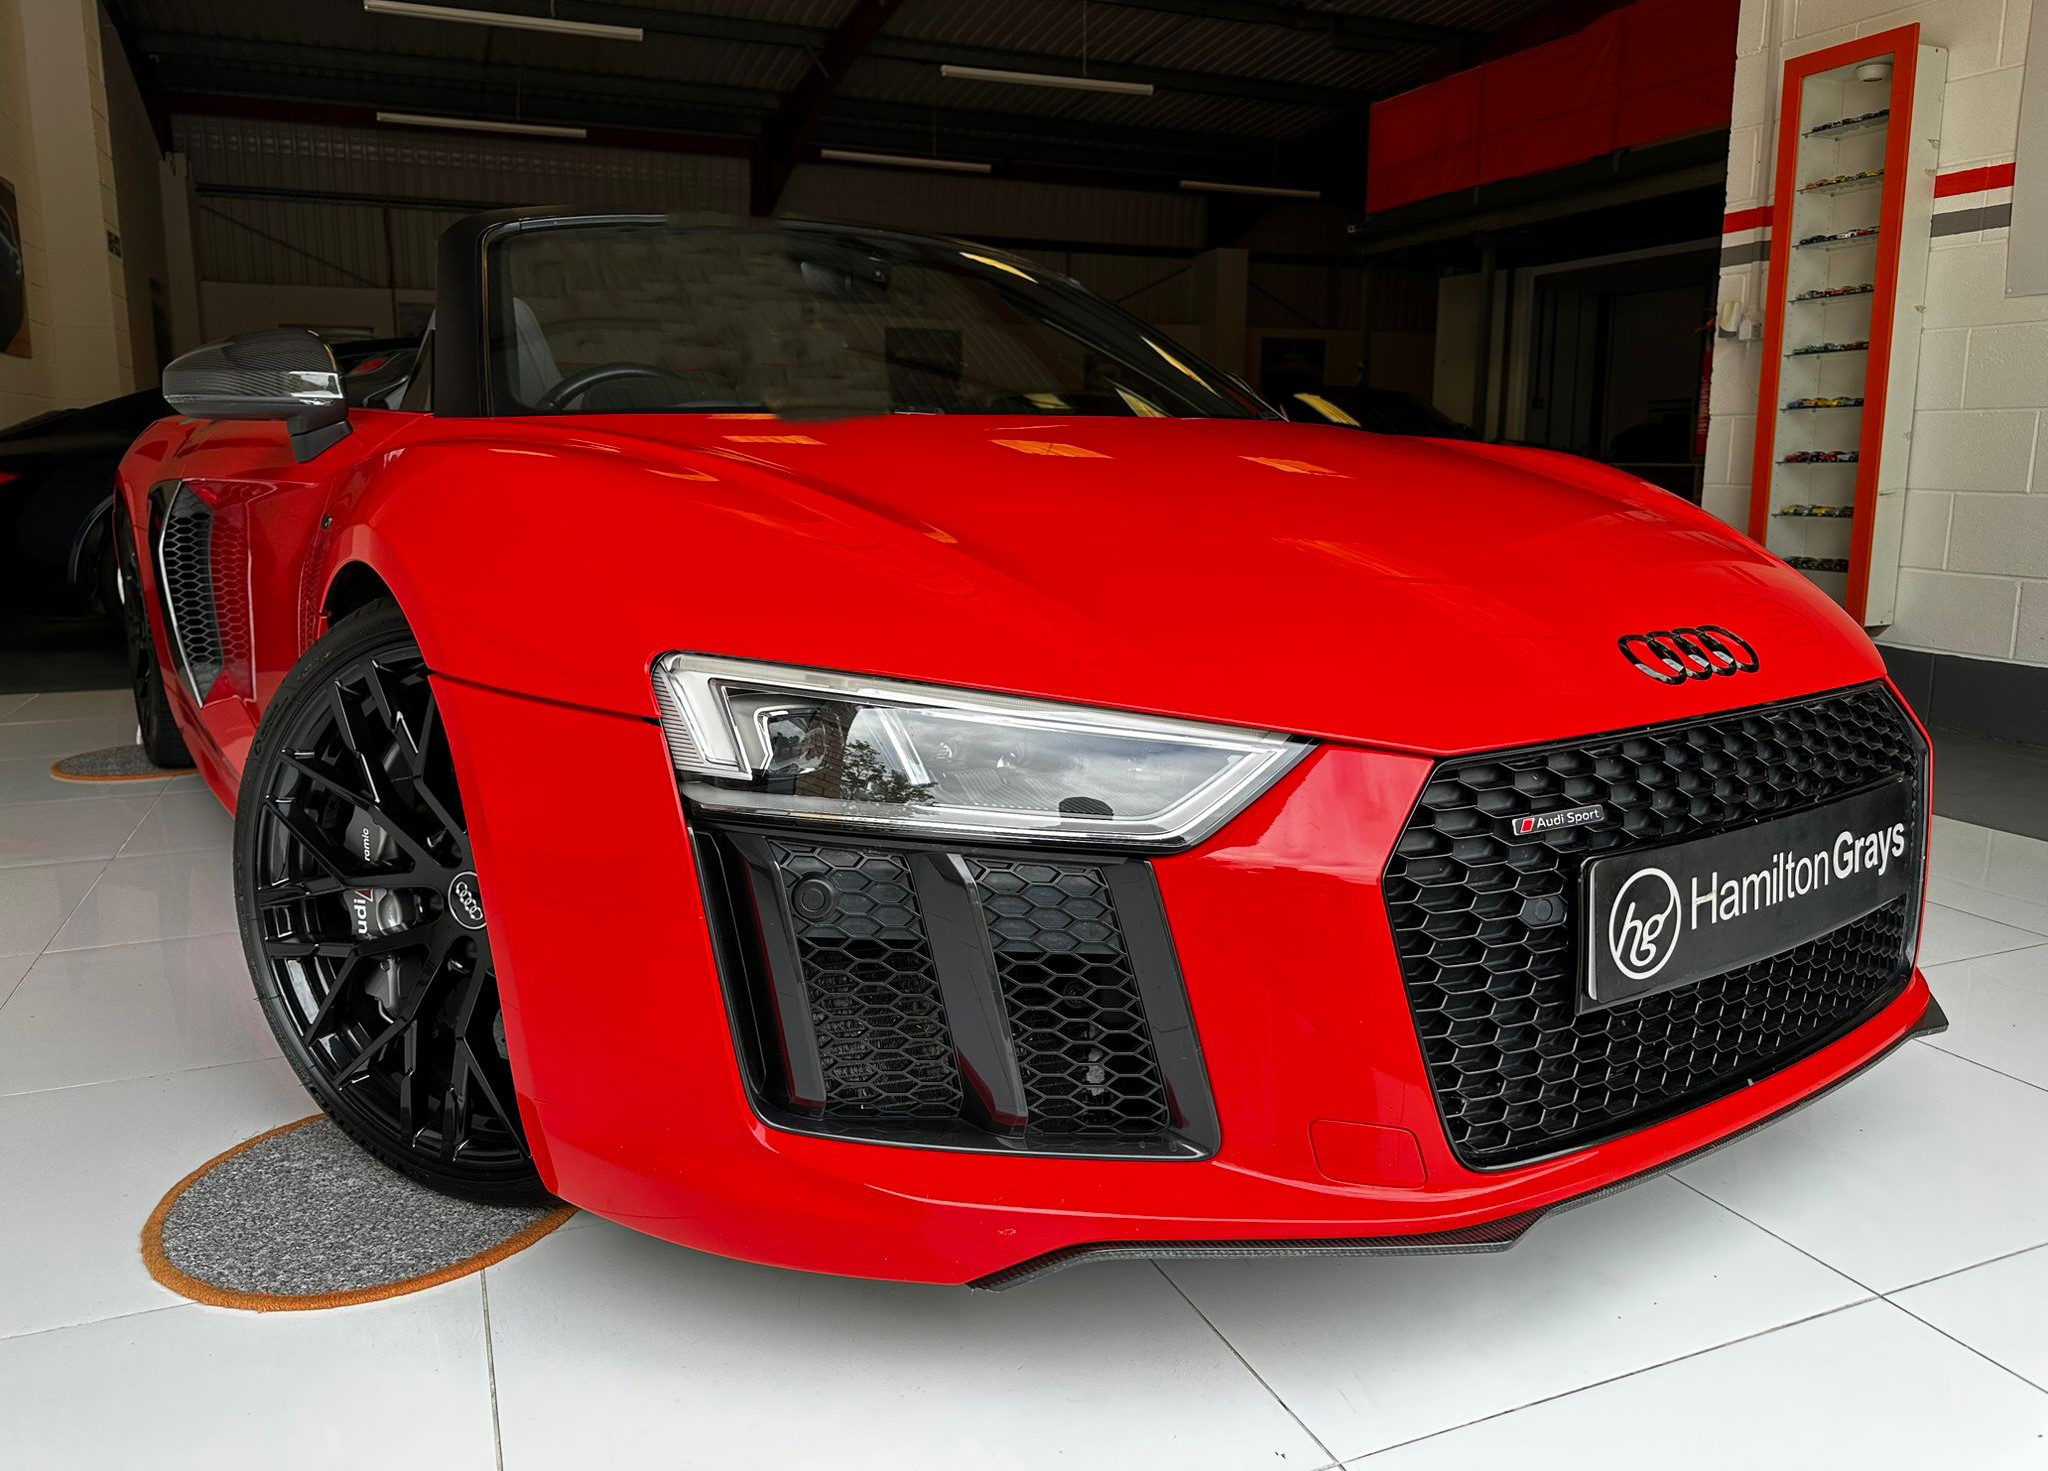 2016 (66) Audi R8 5.2 FSI V10 Spyder S Tronic quattro. In Dynamite Red with Contrasting Grey and Silver Upholstery.. Carbon Sports Seats. 32k. FASH. Ceramic Brakes, Sports Exhaust.. £82,950